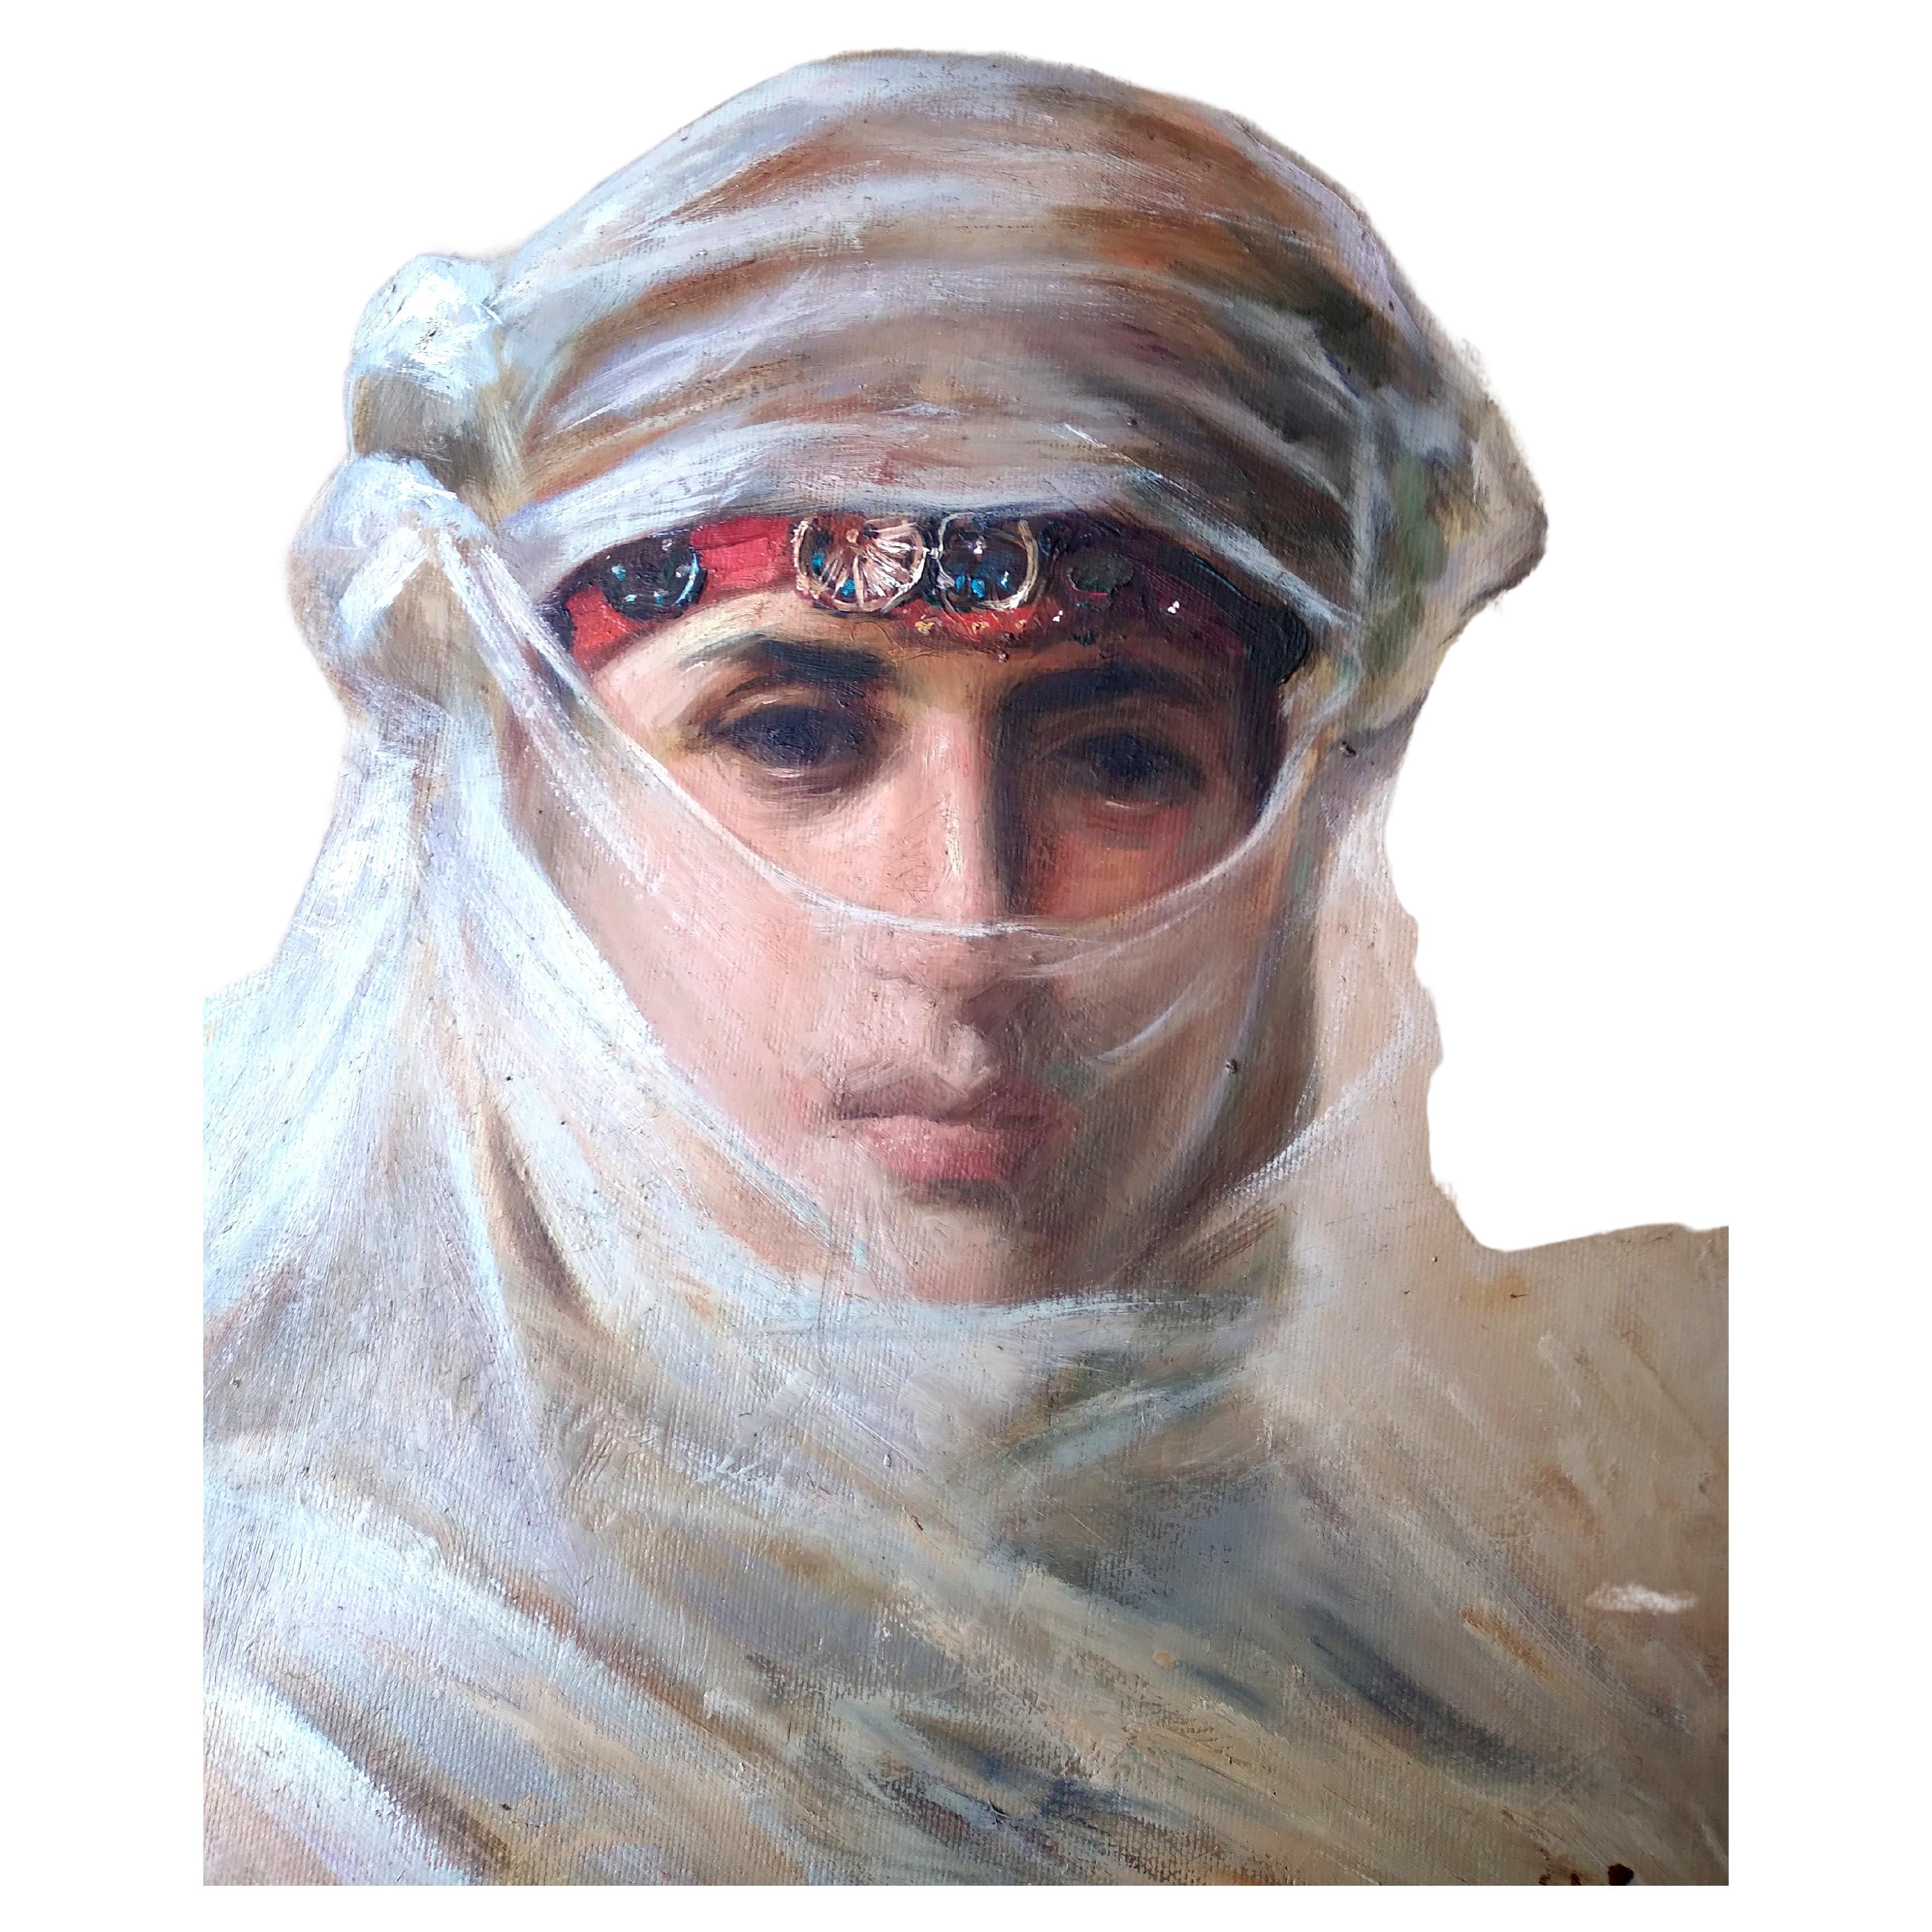 Oriental Scool Painting Portrait of Young Arab Princess of Desert